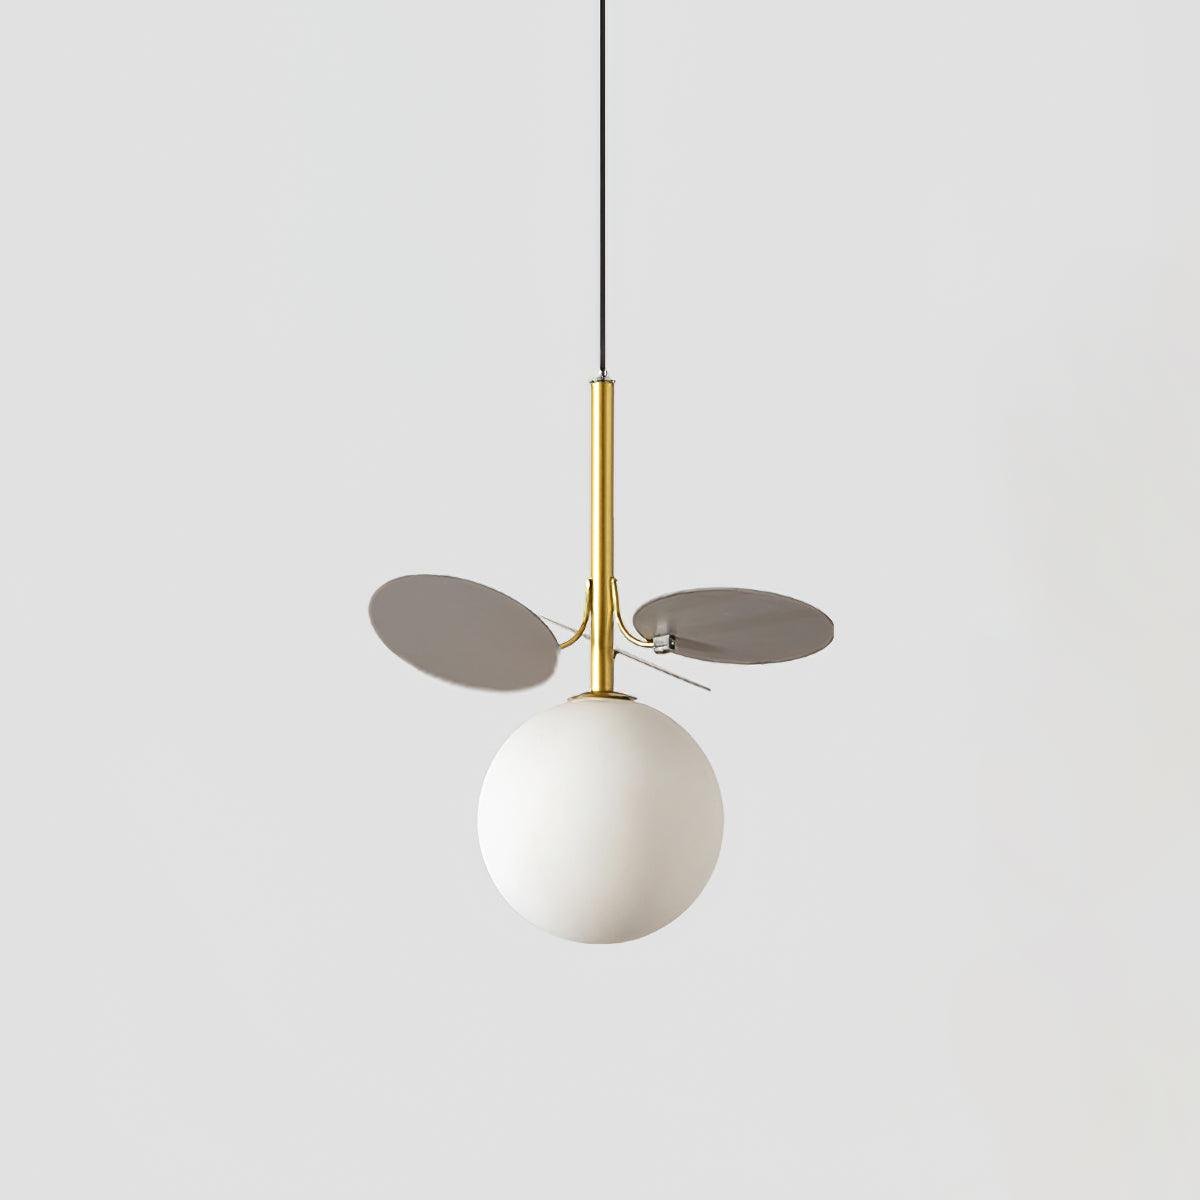 Blanca Pendant Light, Golden and Grey, 7.9 inches Diameter x 8.7 inches Height (20cm x 22cm)